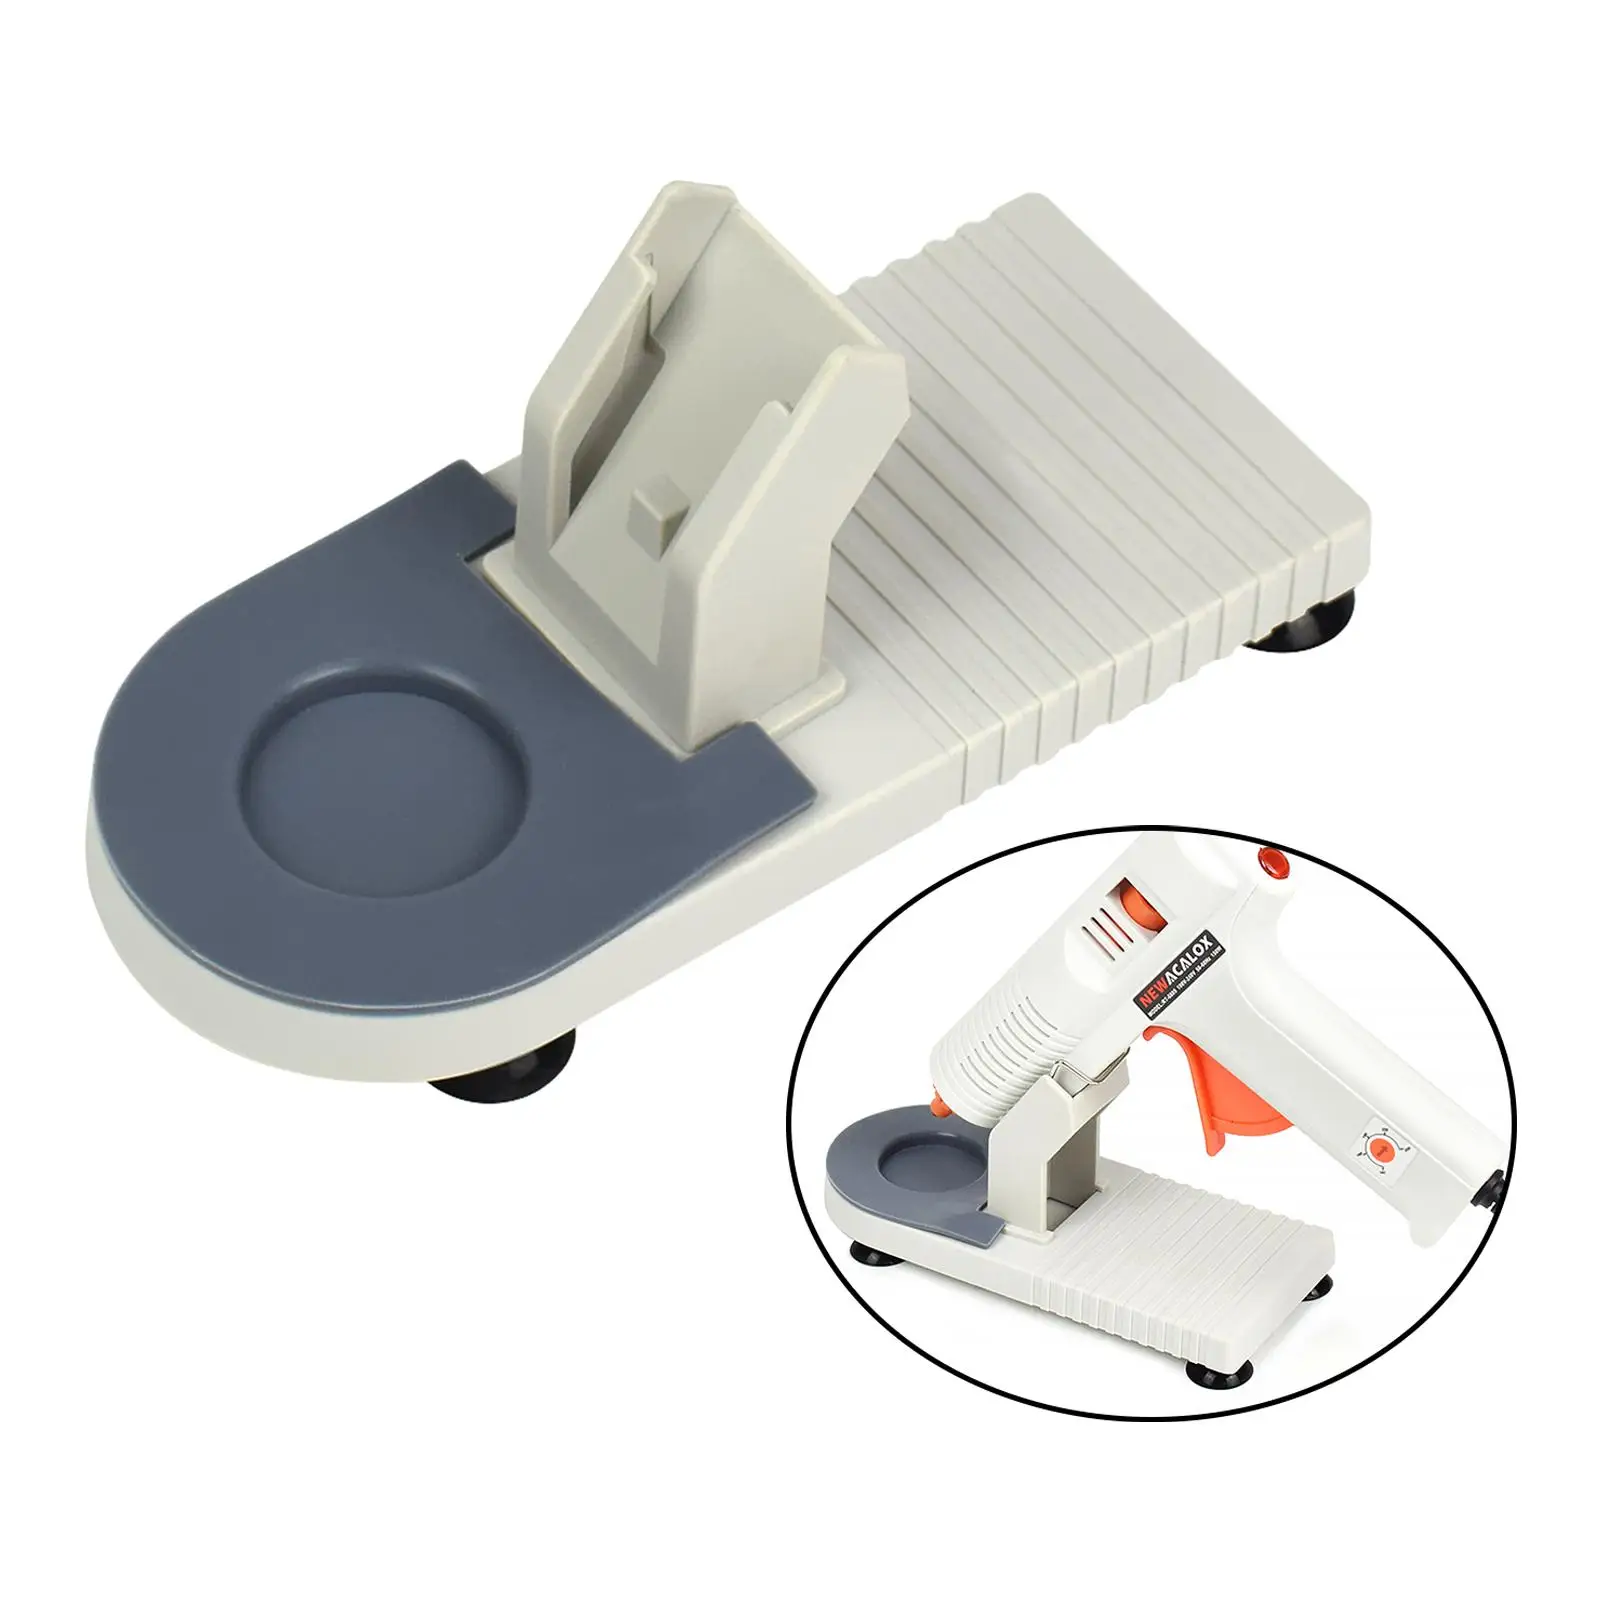 1x Base Storage  Hot Glue Bracket for Household Electricians